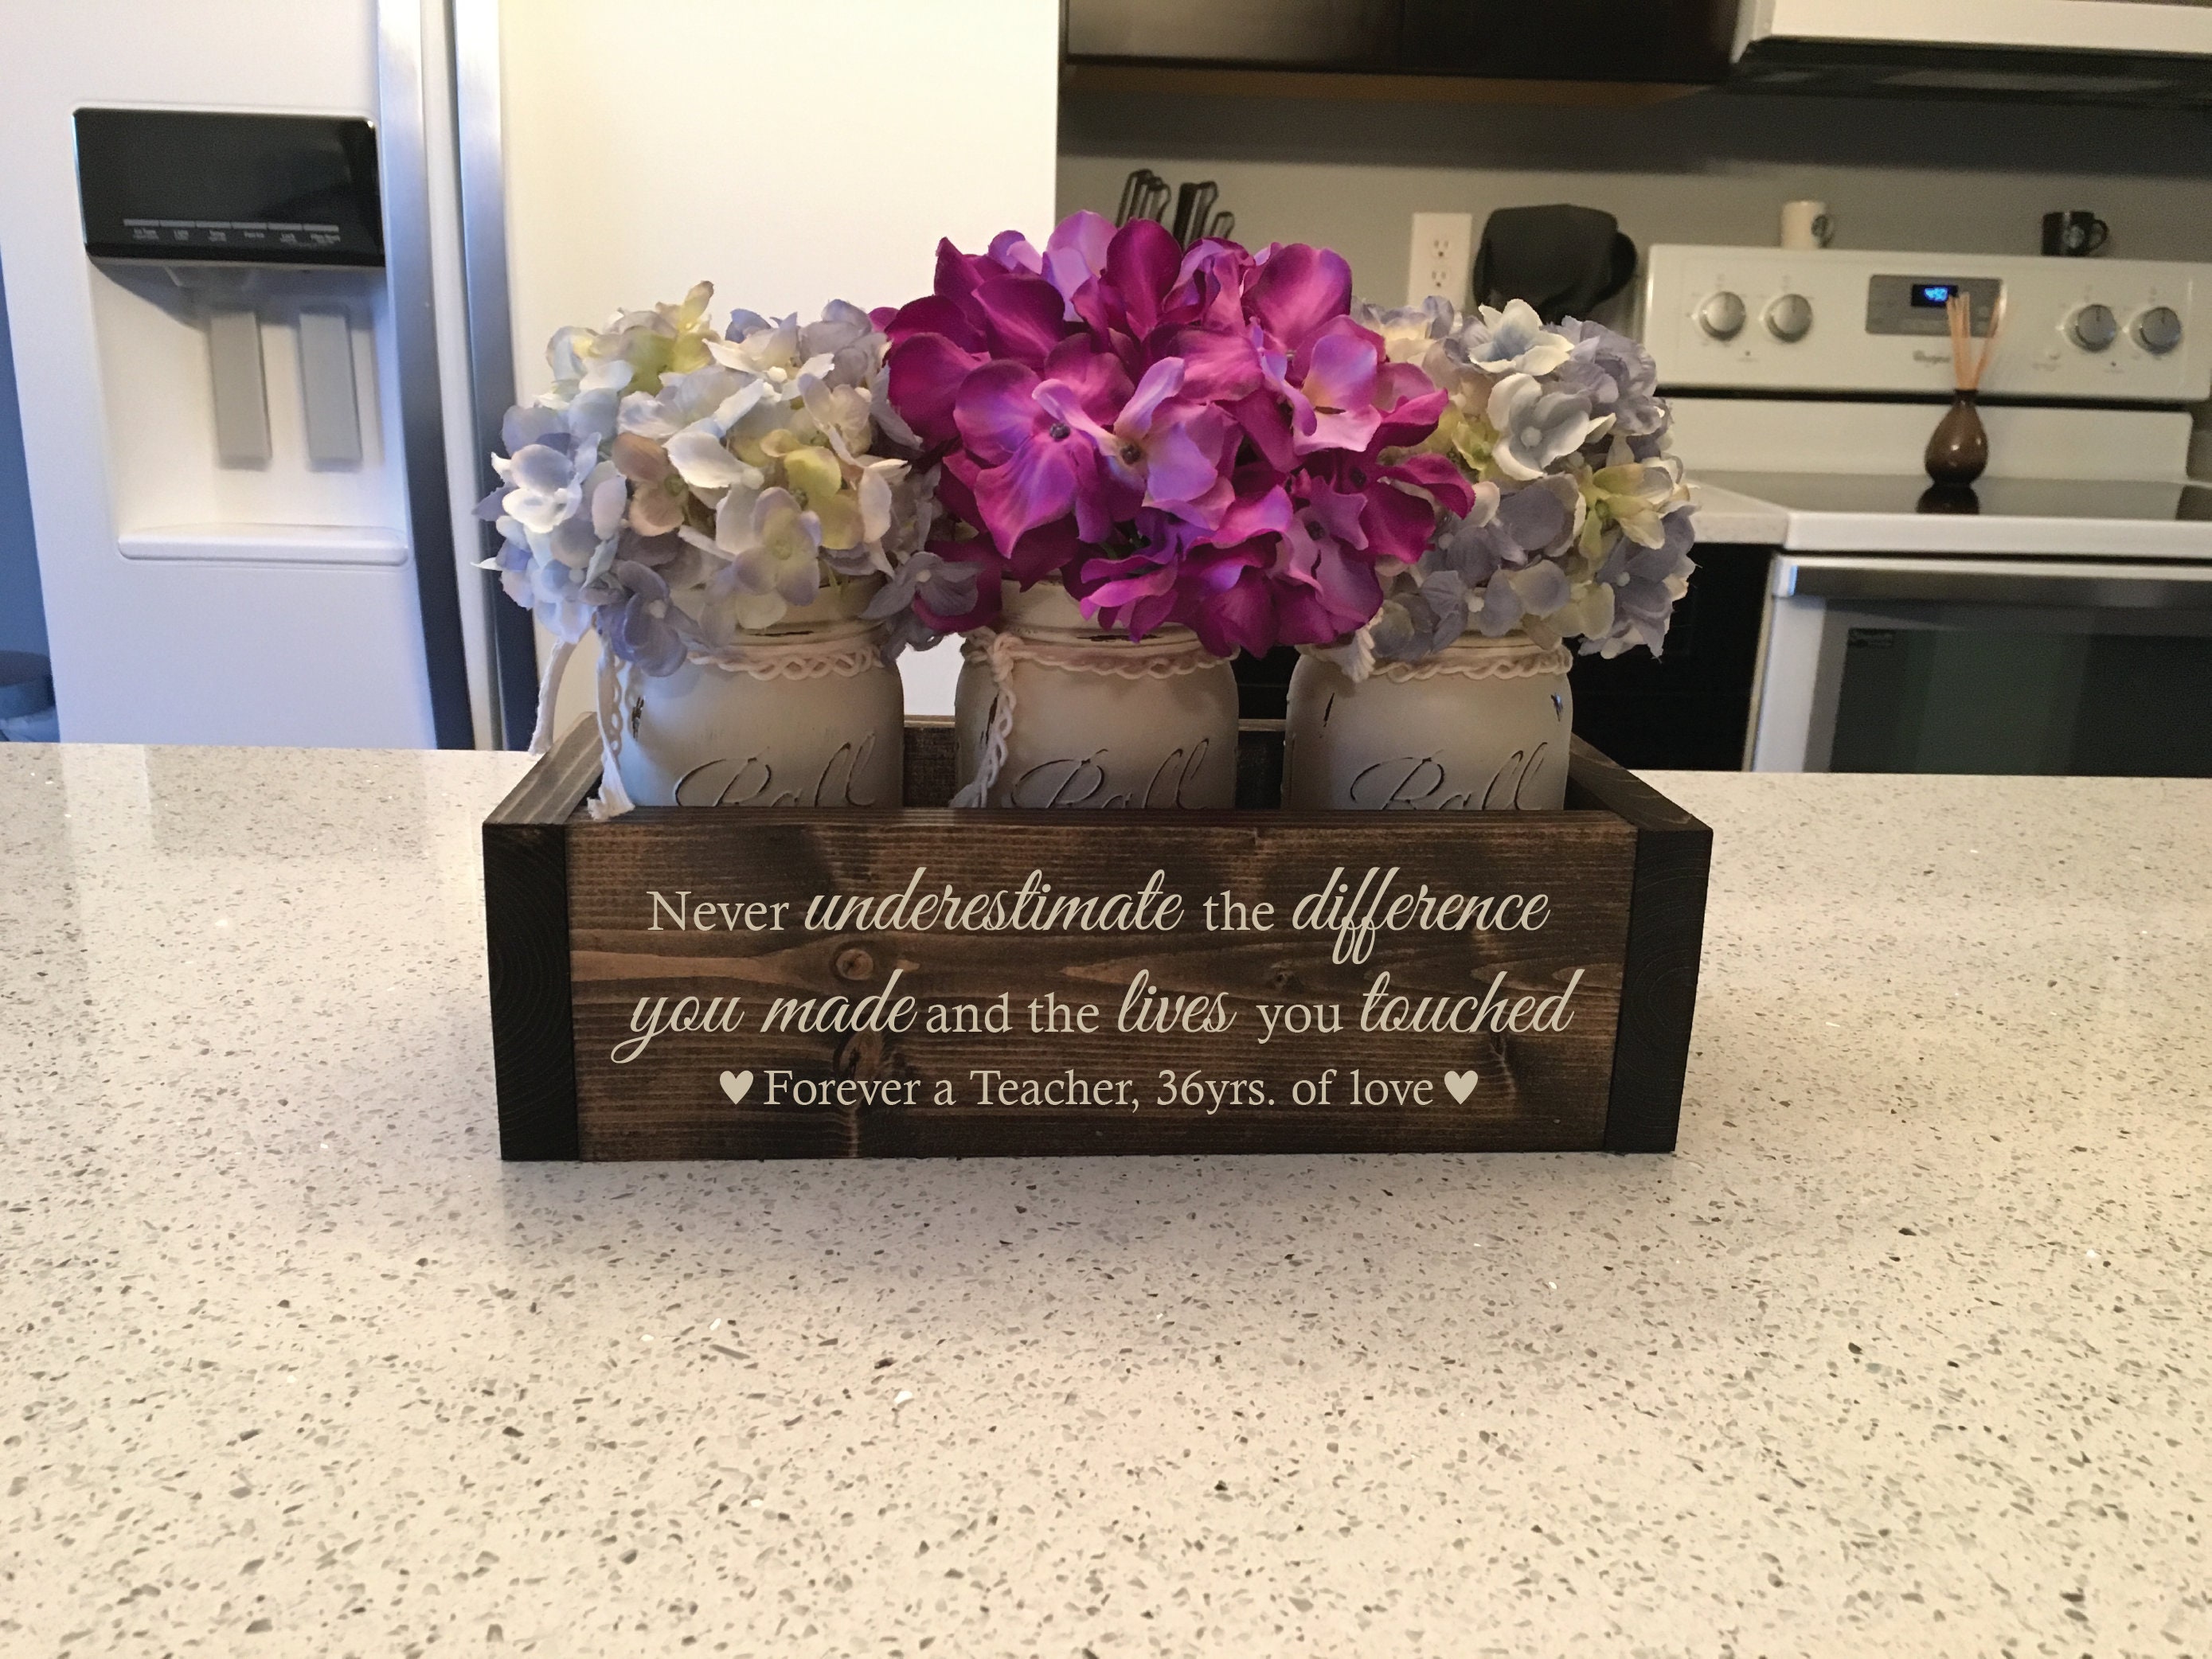  Retirement Gifts For Women Employee Appreciation Gifts  Thanksgiving Gifts For Women Coworker Staff Gift Desk Decorative Sign For  Home Office for Co-workers Teachers,Nurse,Friends,Wife (Work Team) : Home &  Kitchen